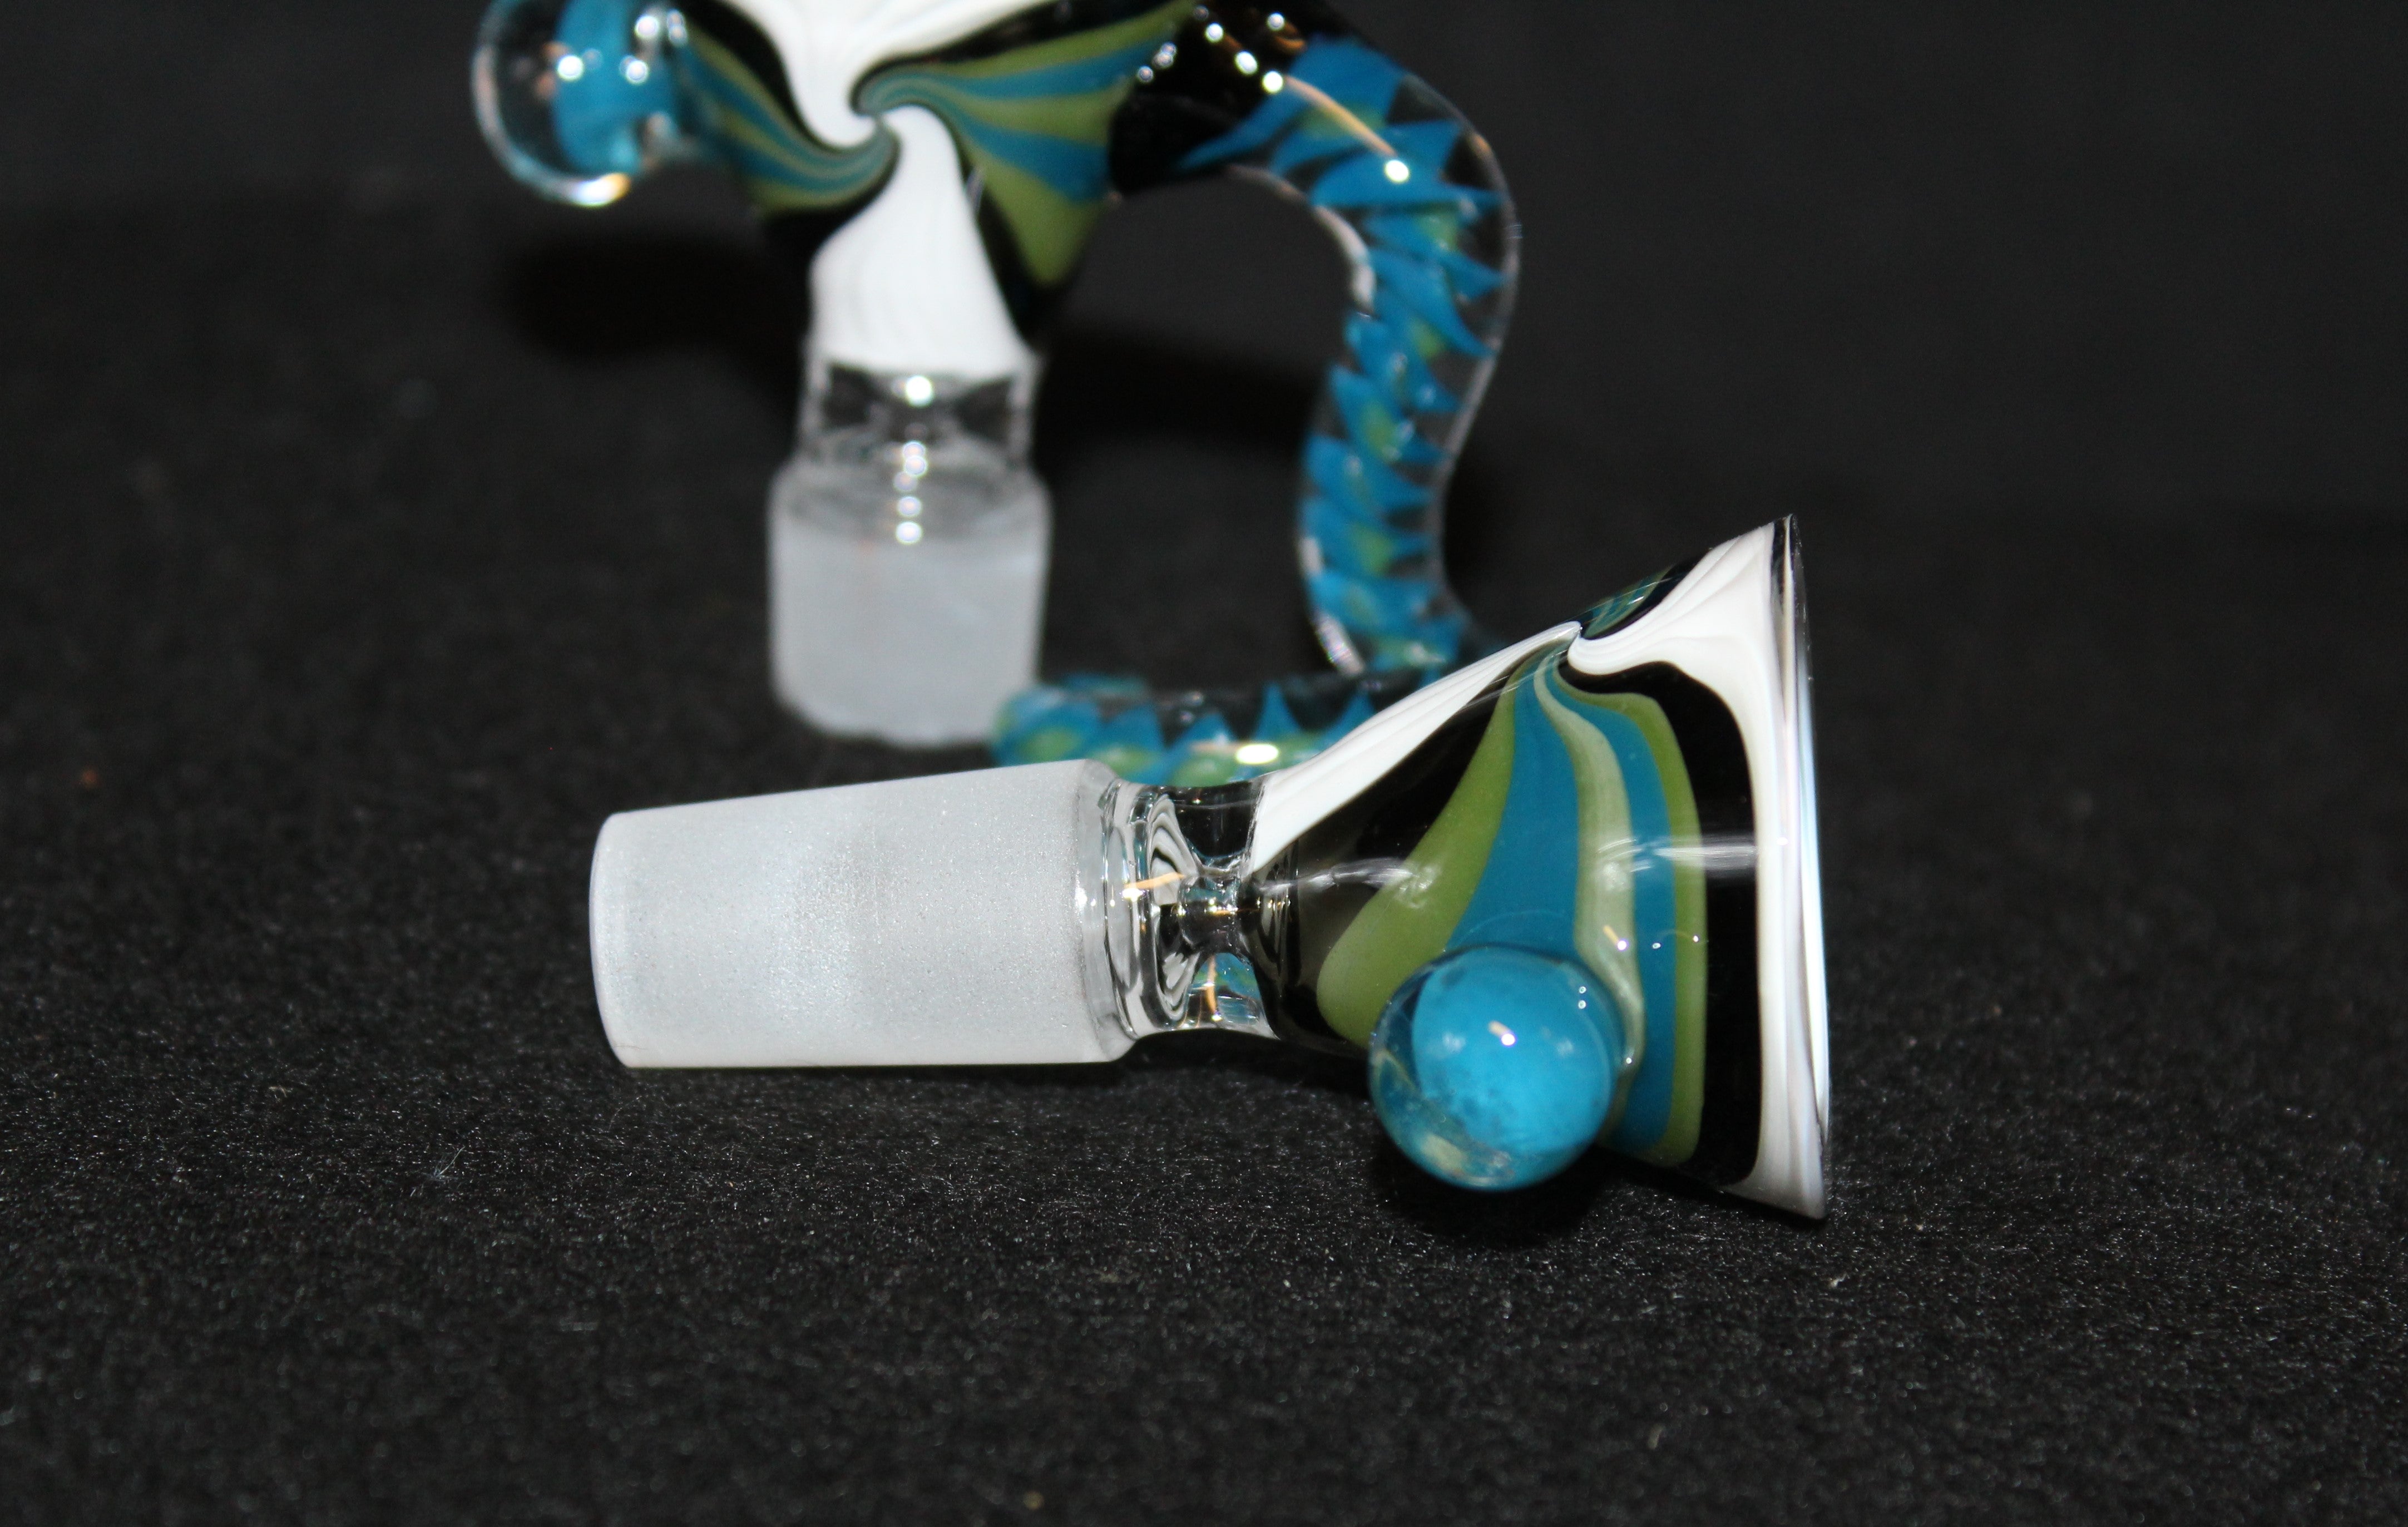 14mm BLUE TAIL Slide Bowl w/ Ball and Horn THICK GLASS Slide Bowl